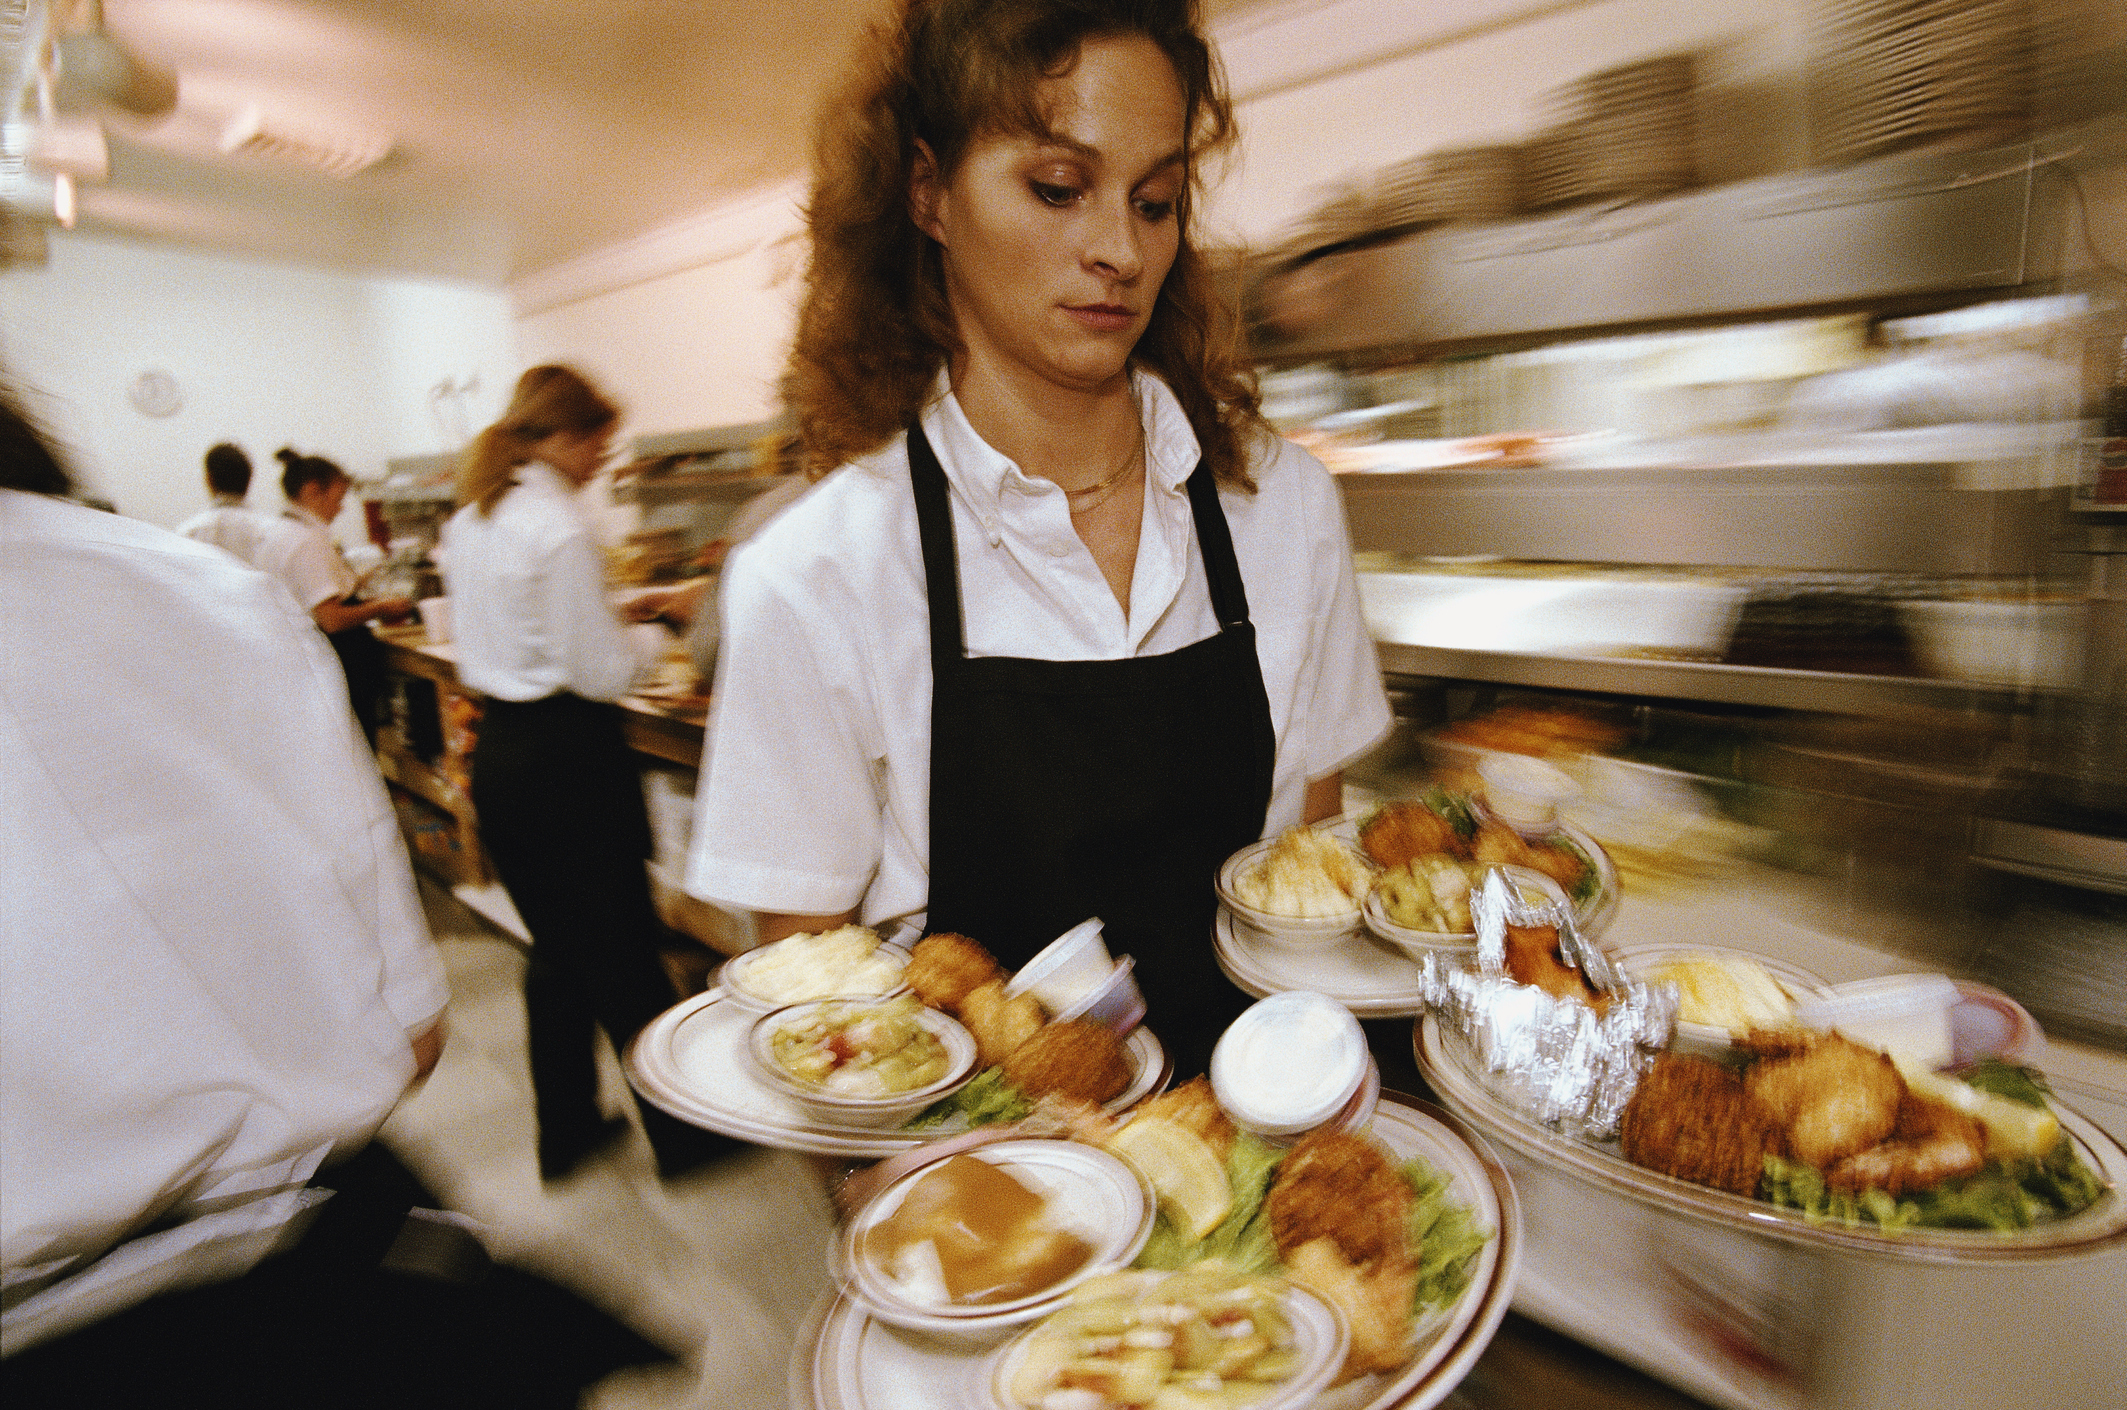 A waitress carrying multiple plates in the kitchen